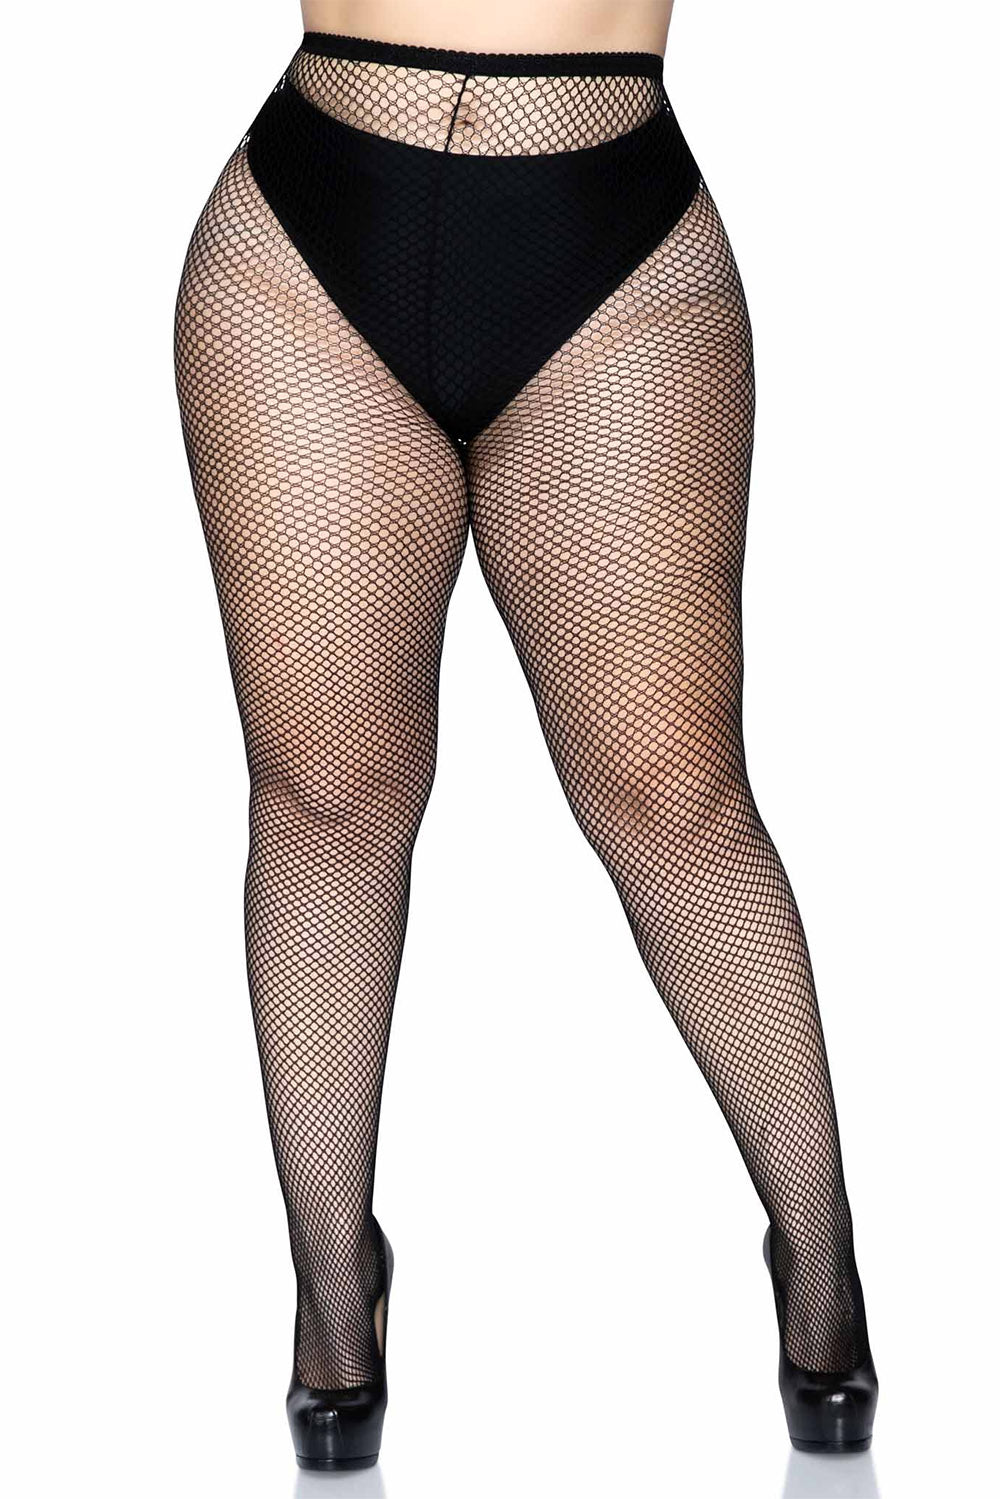 Witch Fishnet Tights [Plus Size]